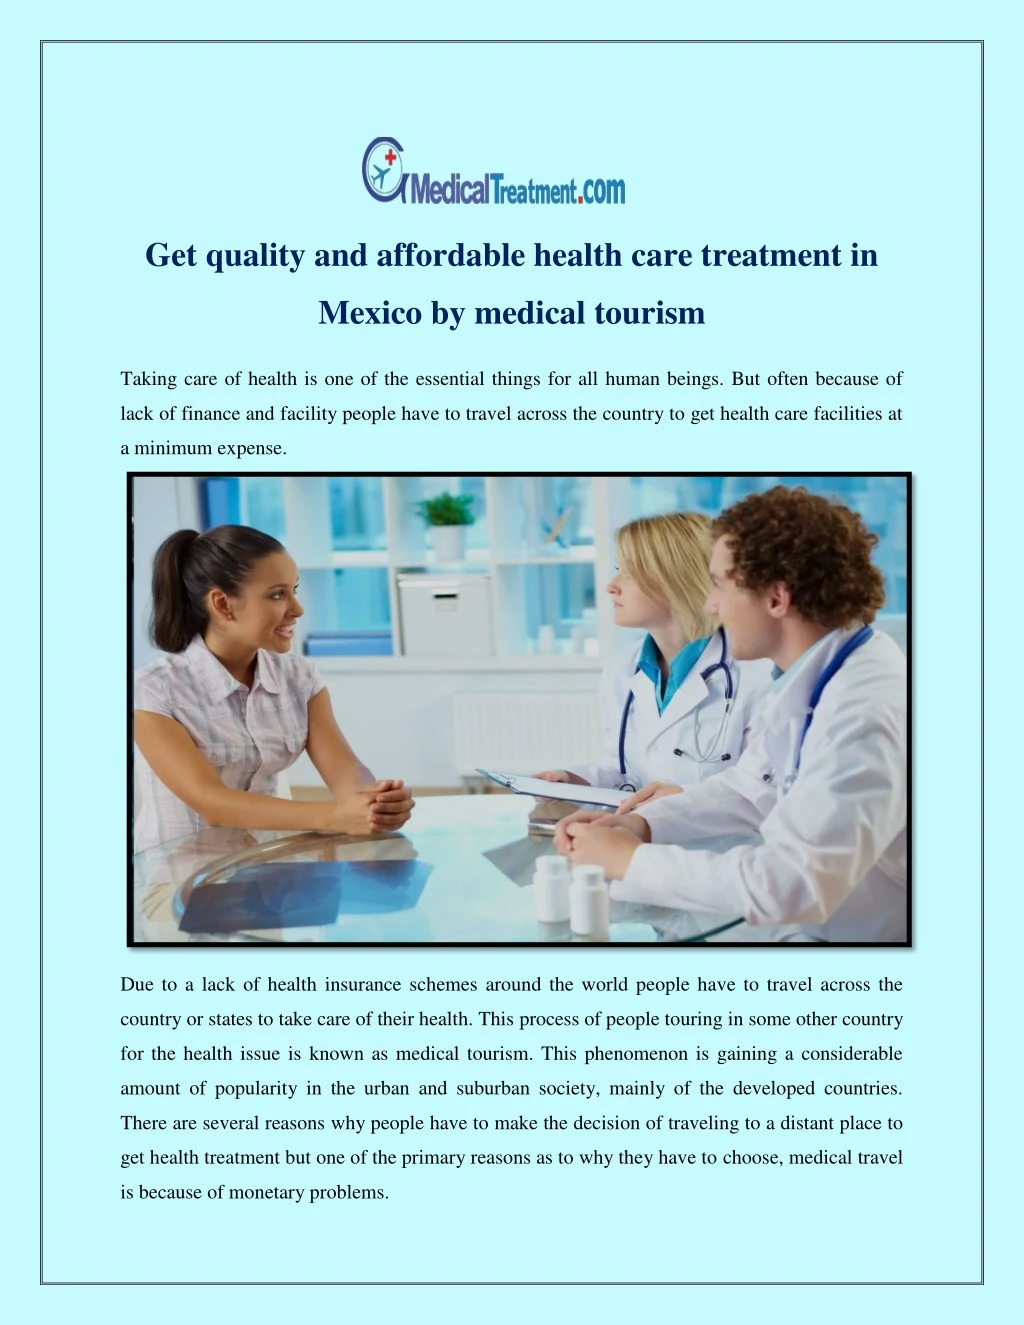 get quality and affordable health care treatment